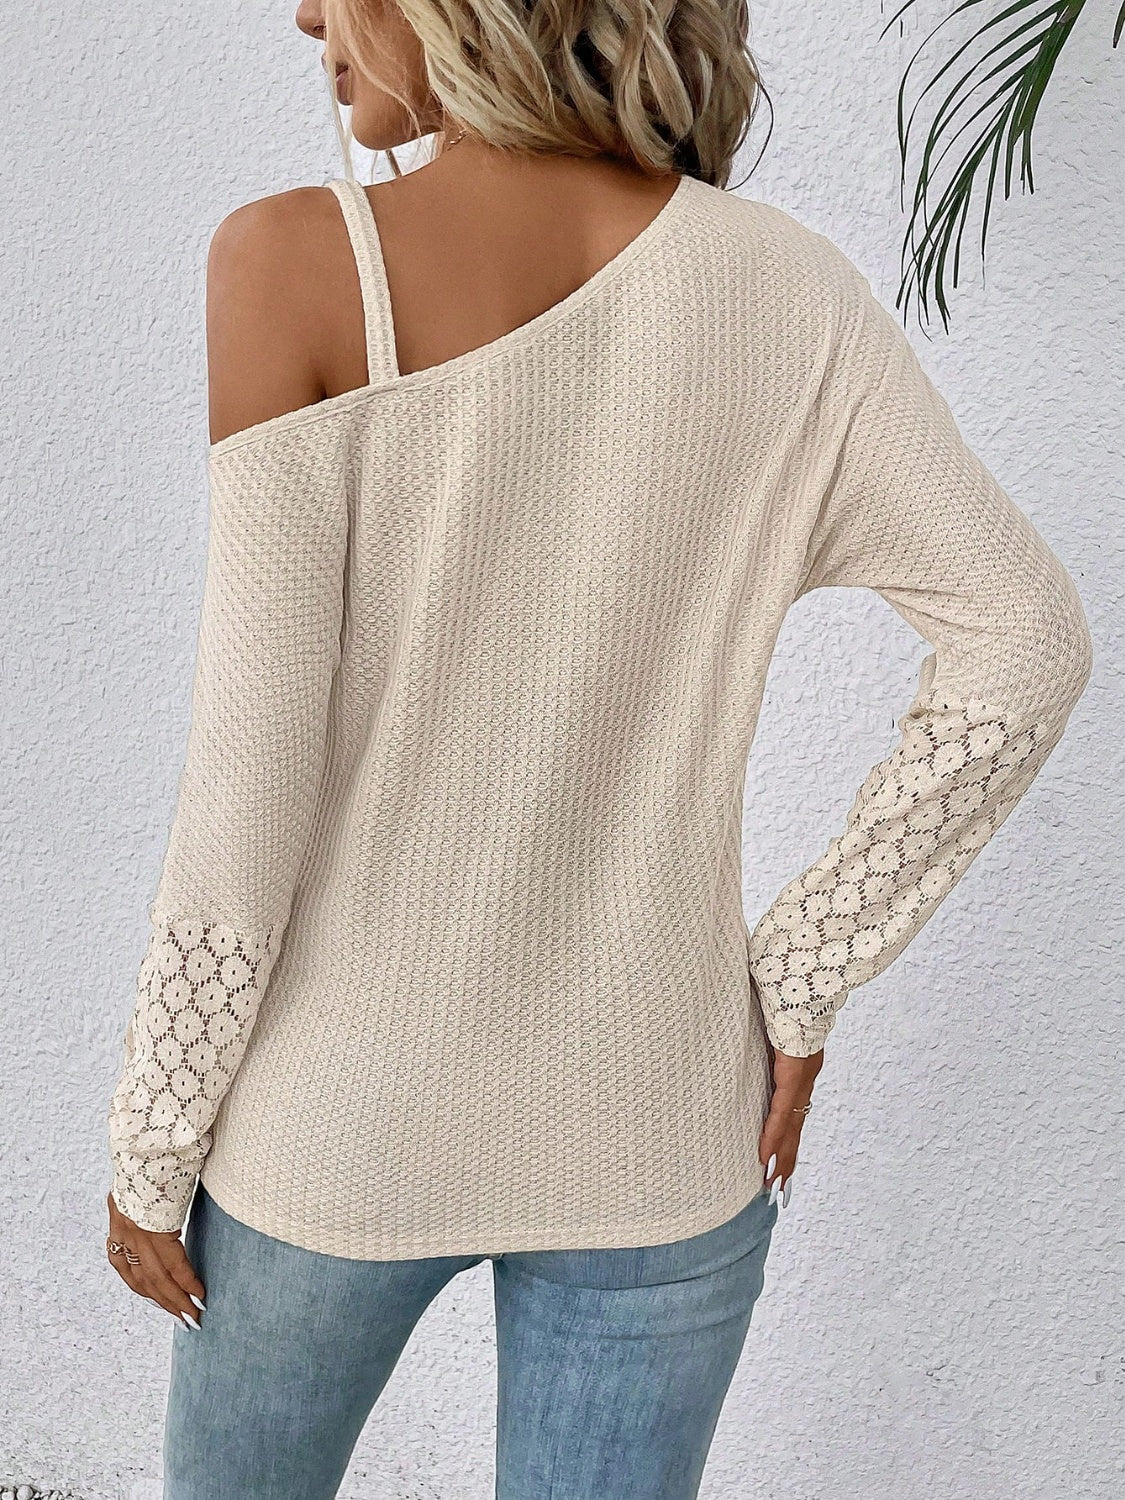 Lace Detail Asymmetrical Neck Long Sleeve T-Shirt Apparel and Accessories